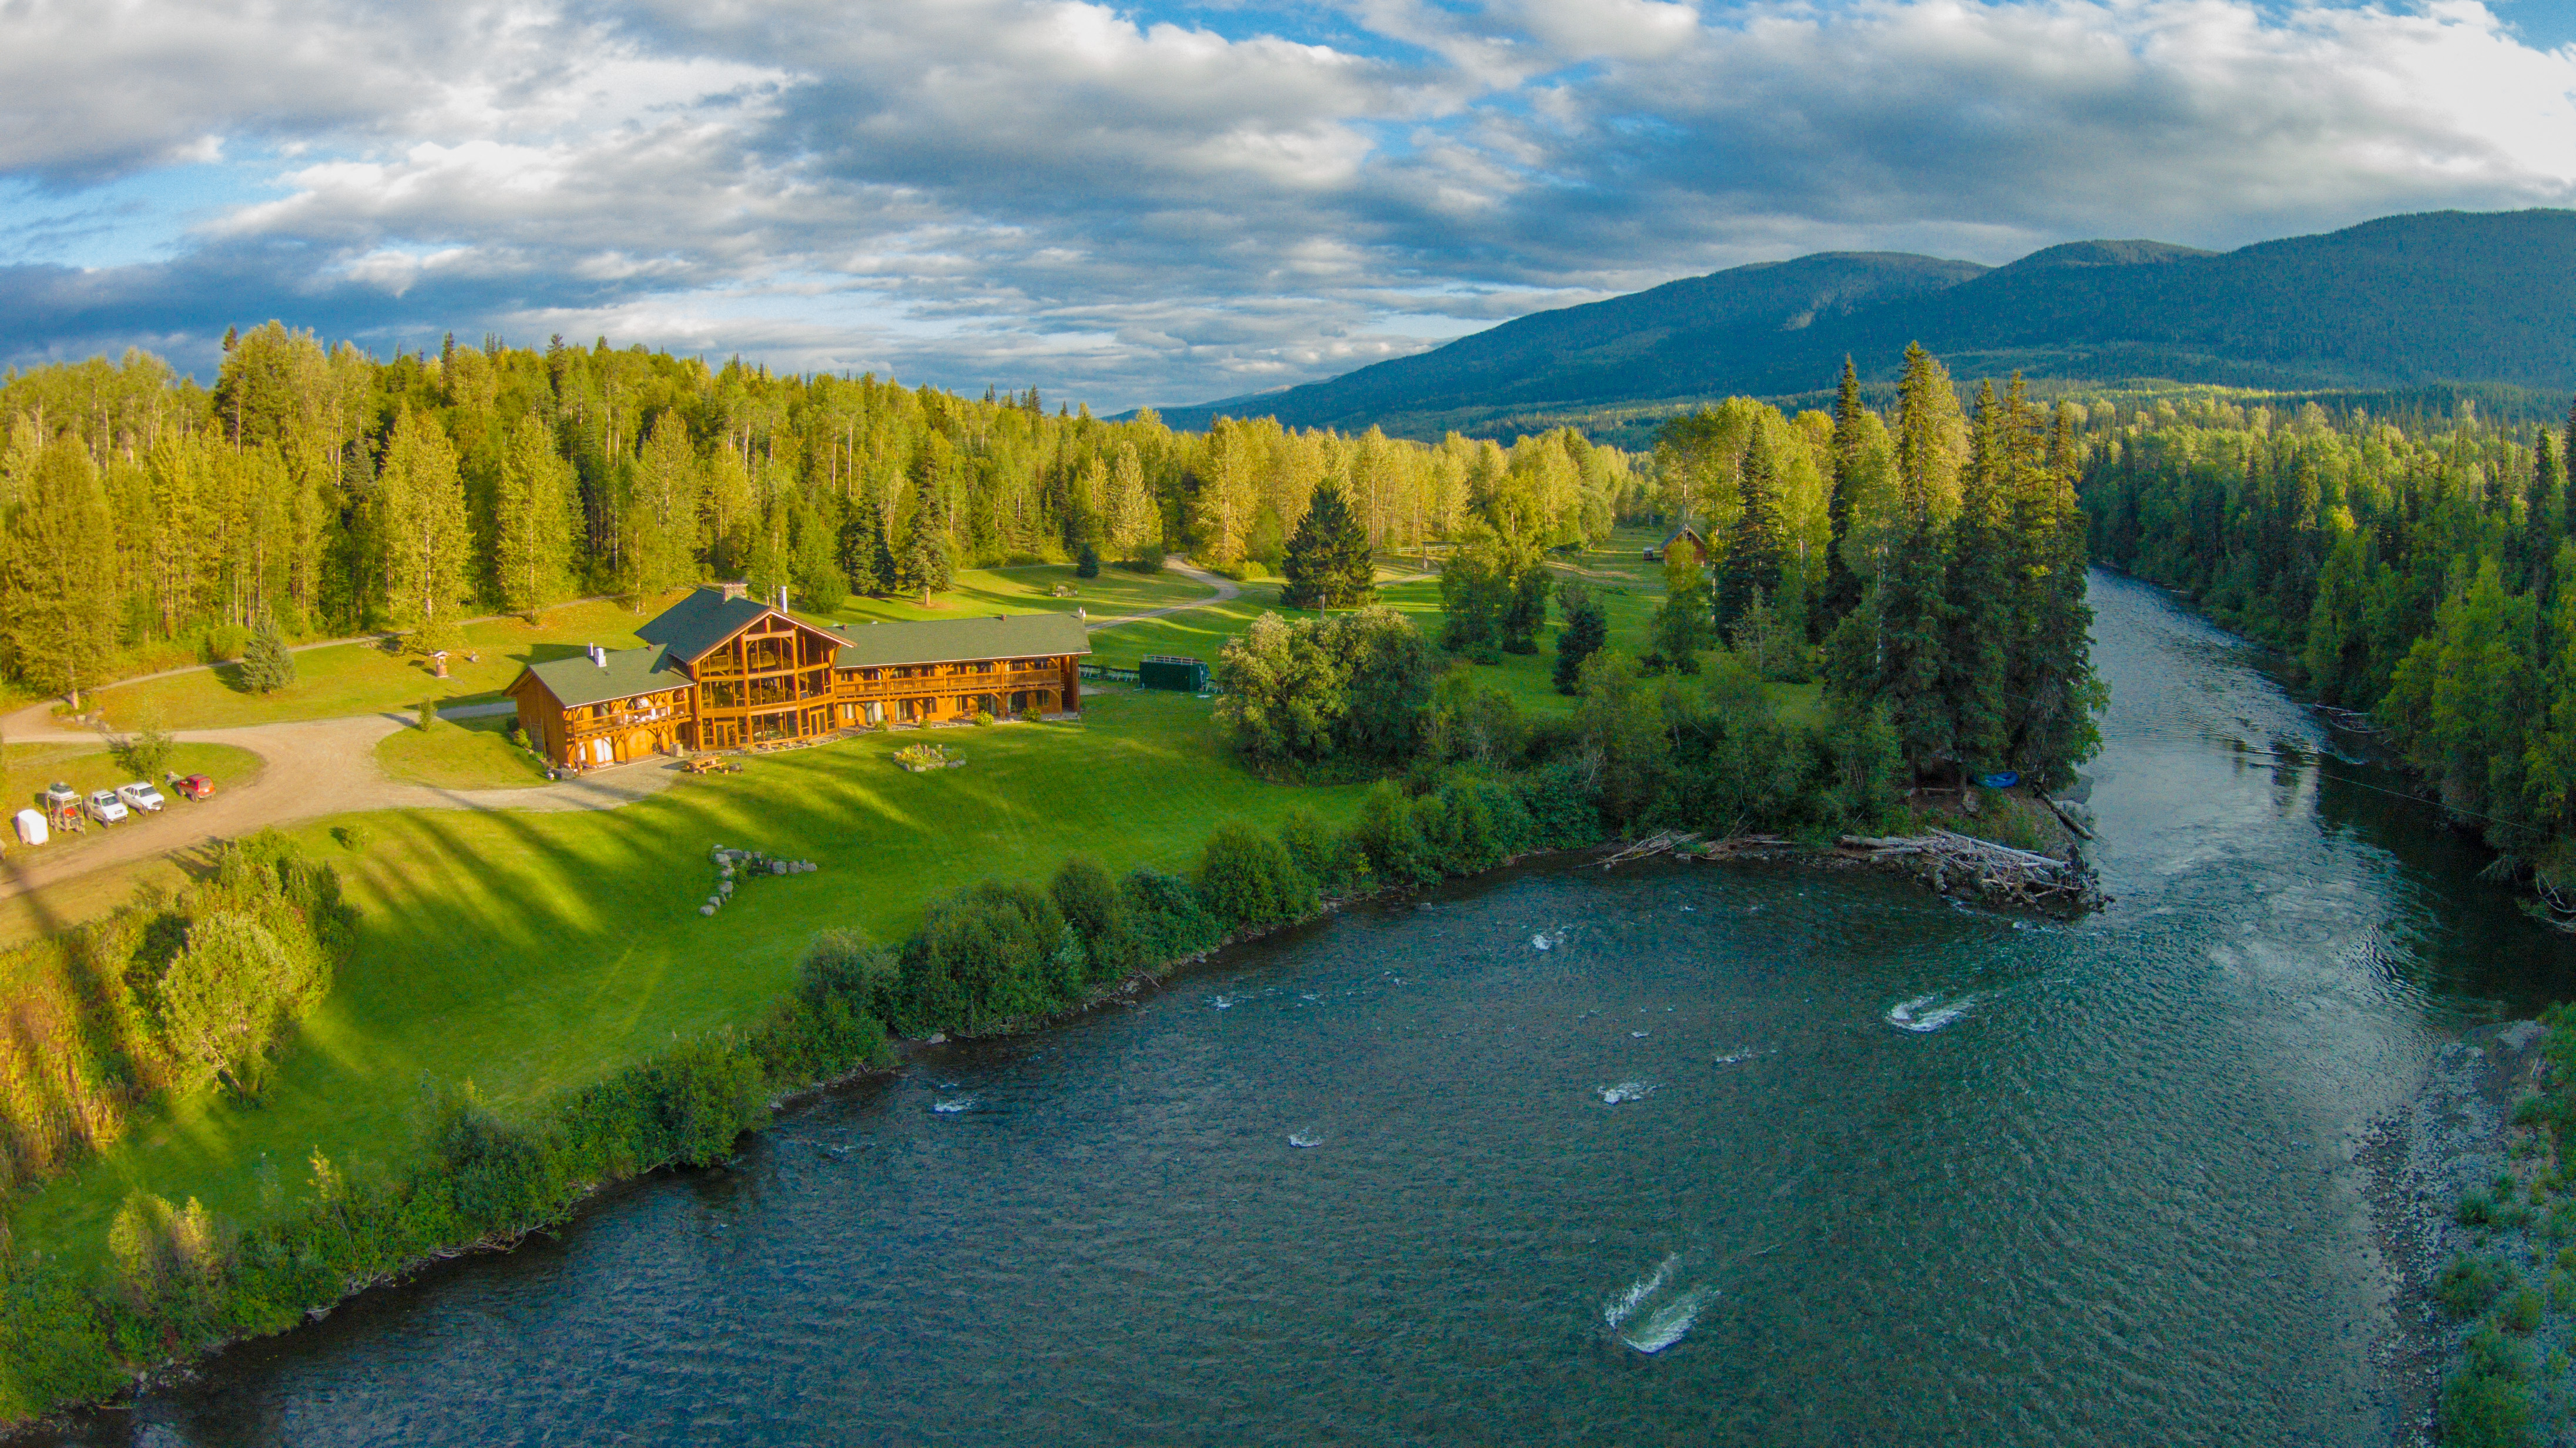 Bear Claw Lodge on the banks of the Kispiox River.